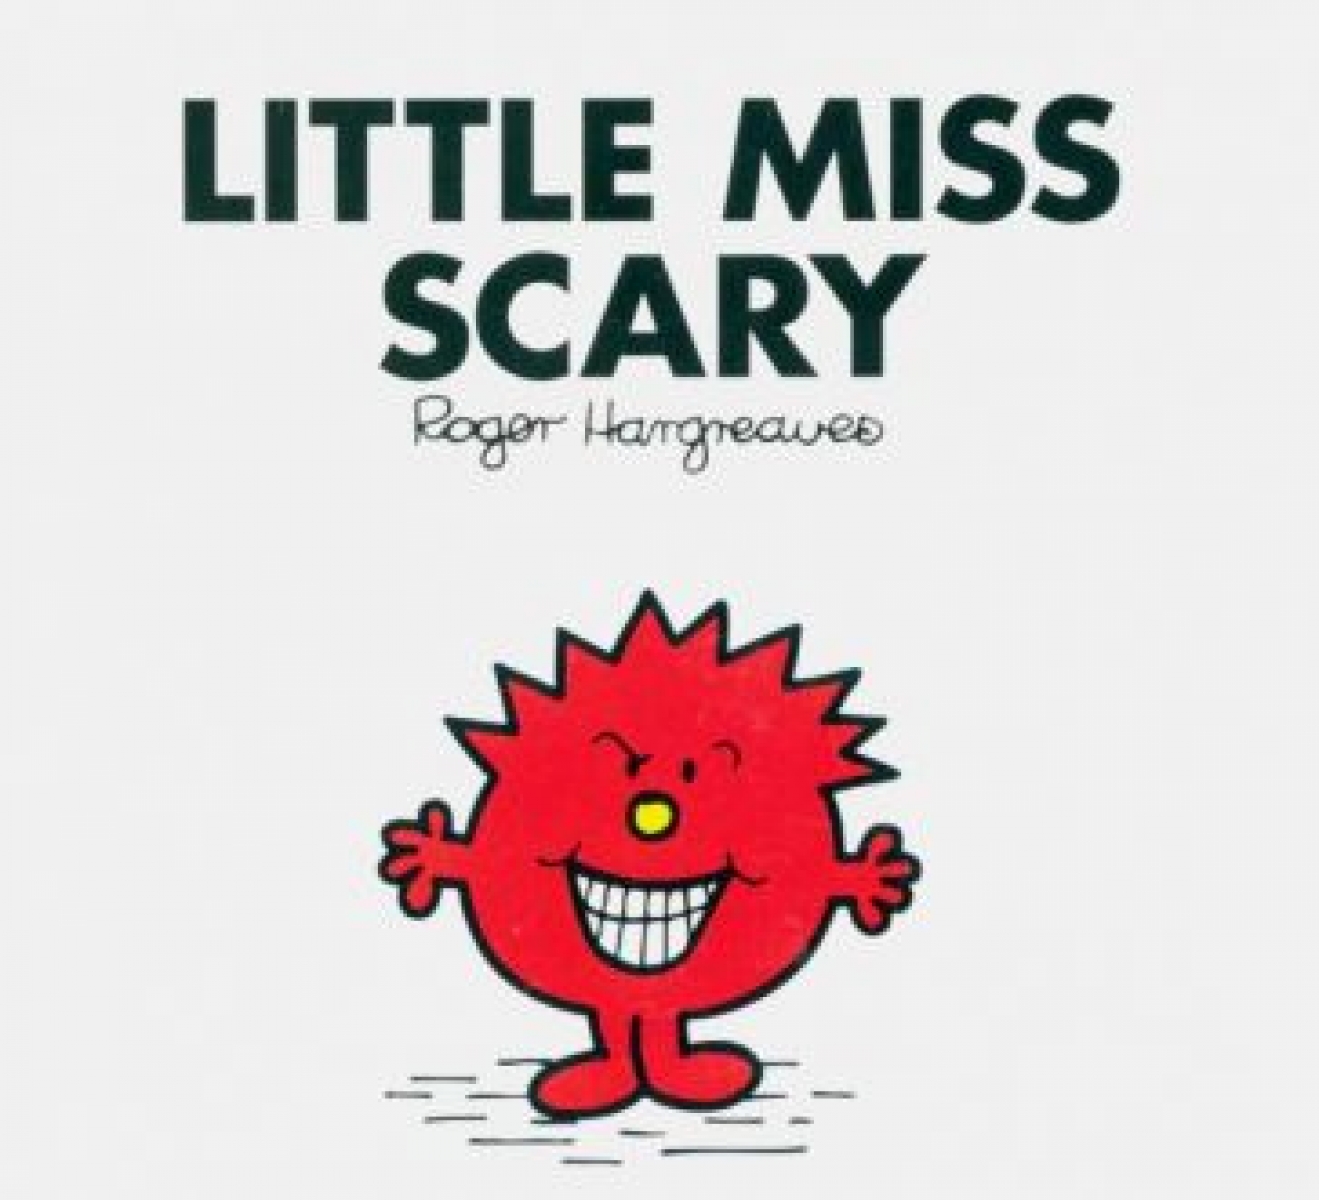 Hargreaves Adam Little Miss Scary 